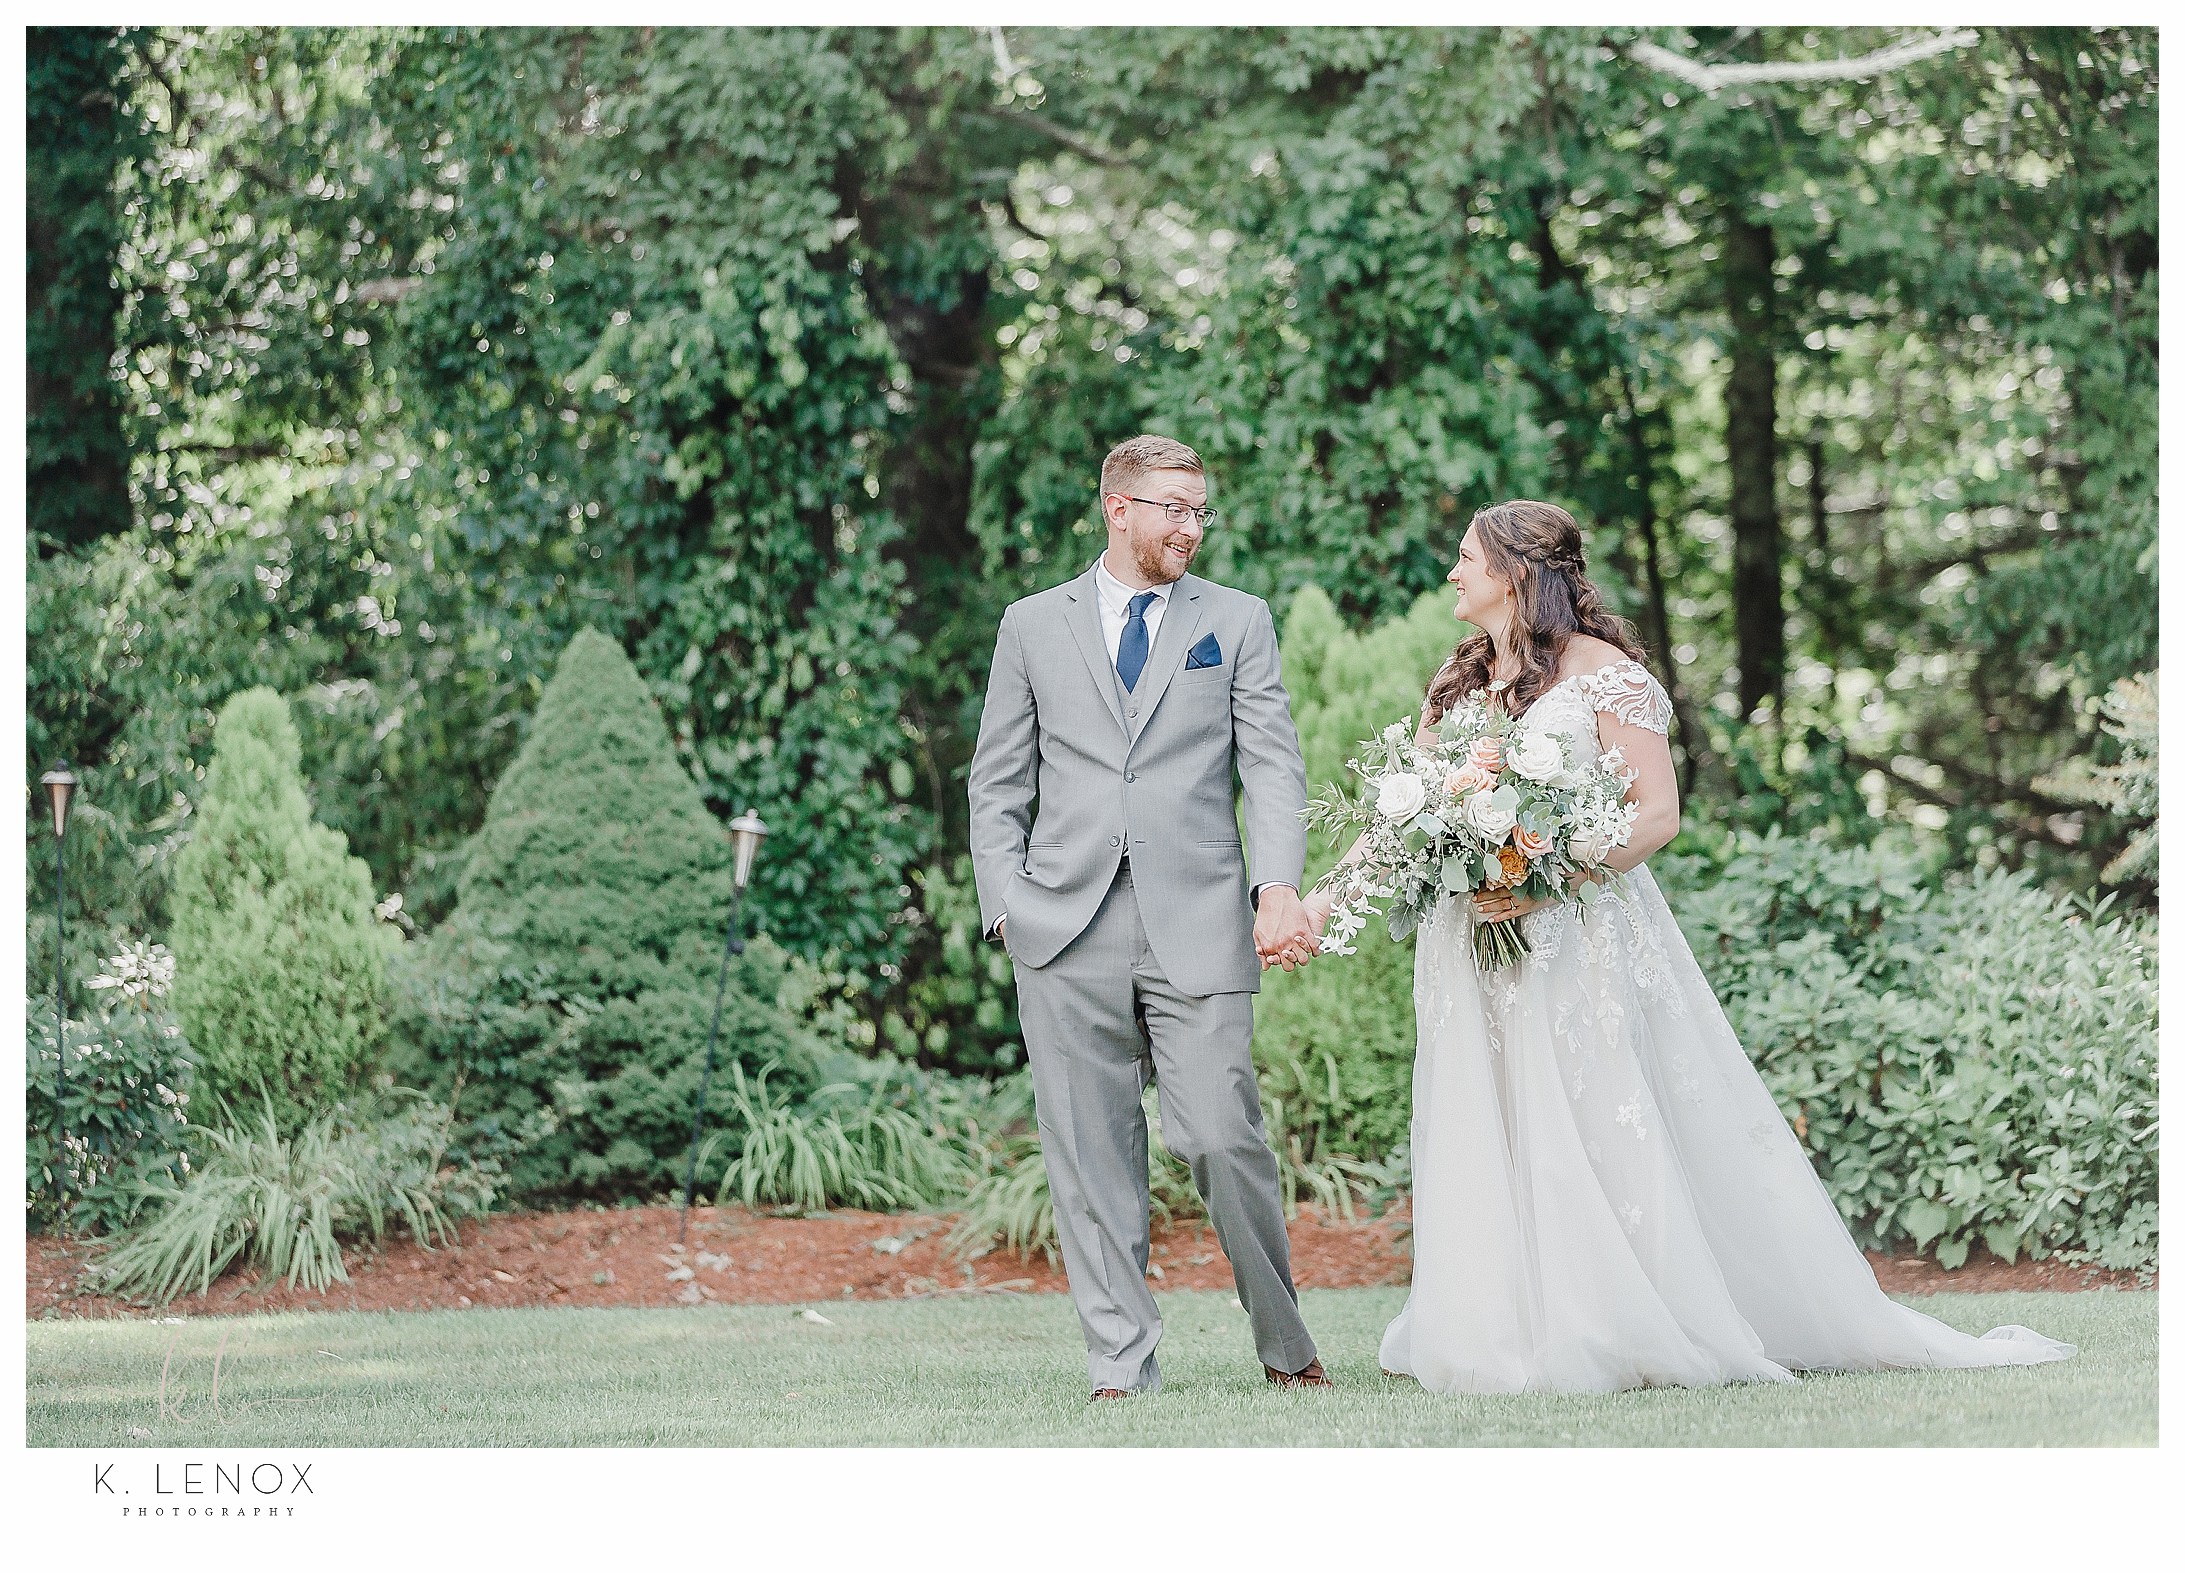 Summer Wedding at the Bedford Village Inn- Color photo of a bride and groom walking hand in hand. 